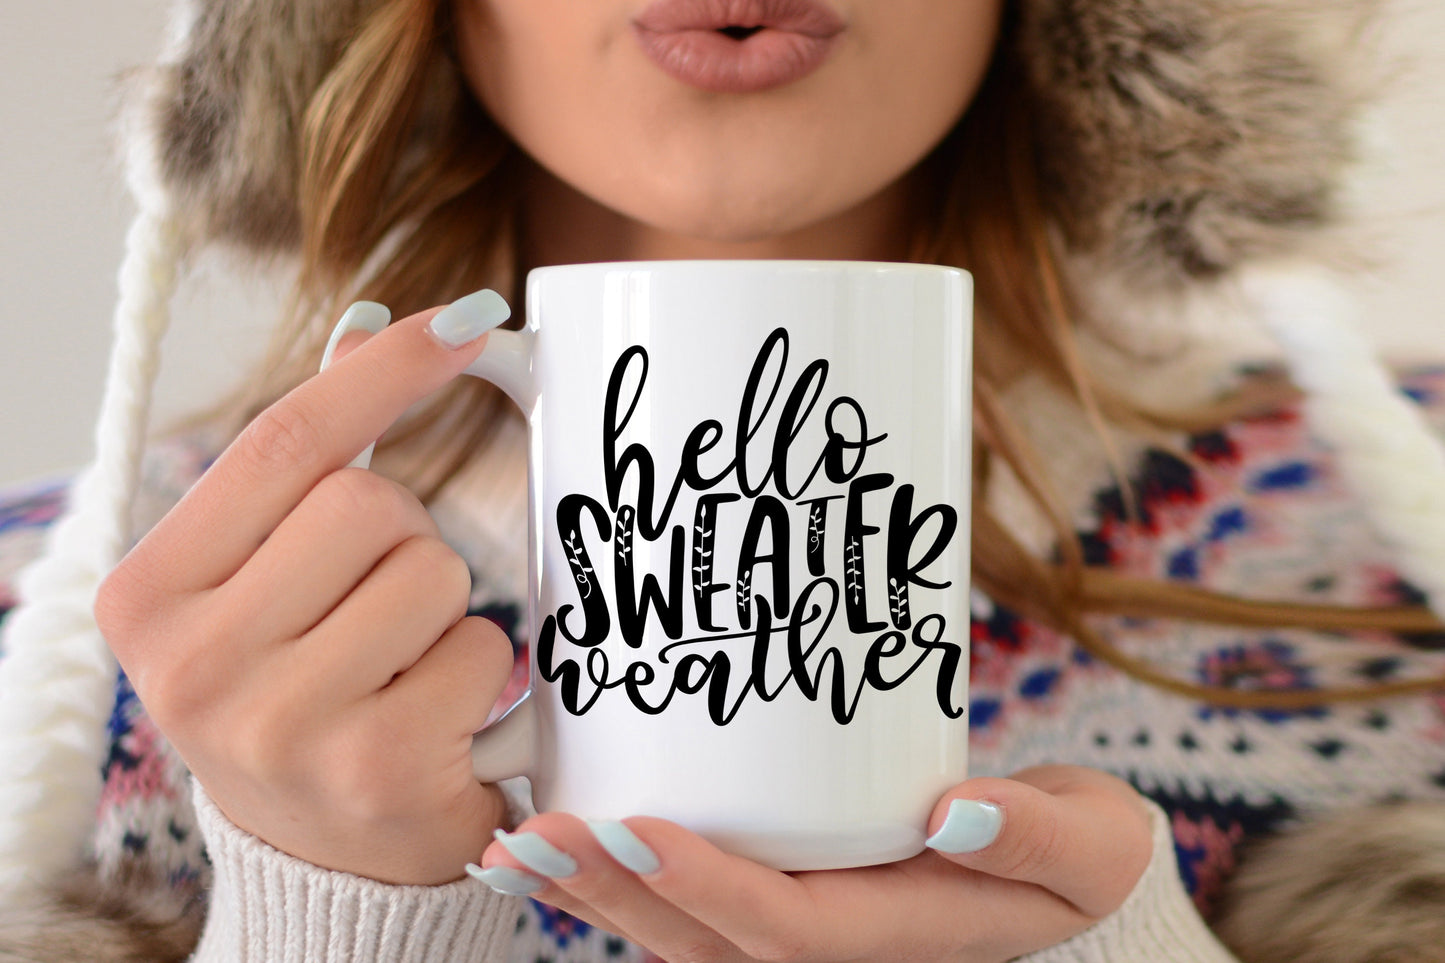 Hello Sweater Weather | Autumn Fall Winter Cutting File and Printable | Sign Mug Tumbler and More | SVG DXF JPG and More!